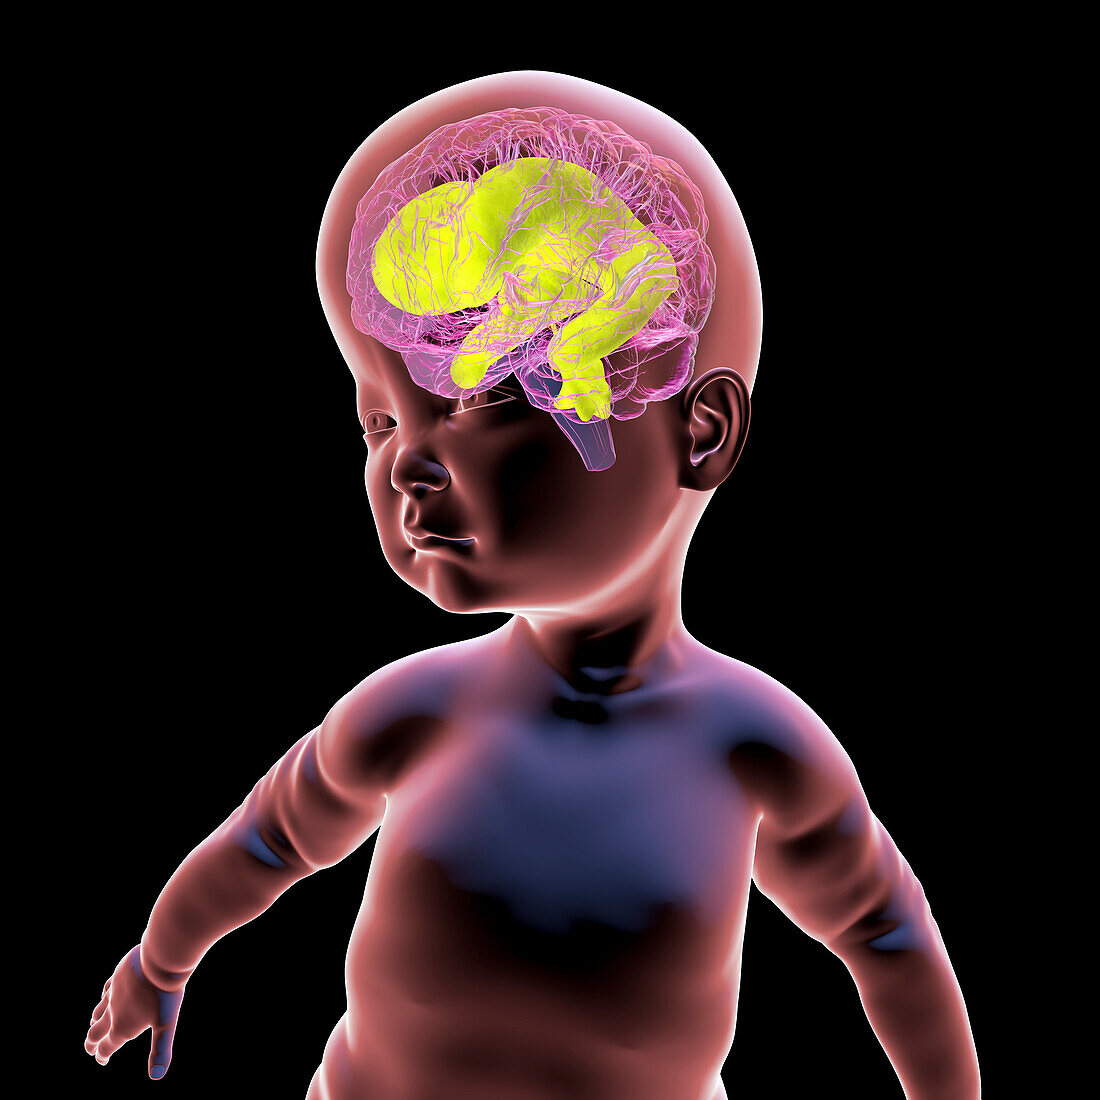 Baby with enlarged brain ventricles, illustration